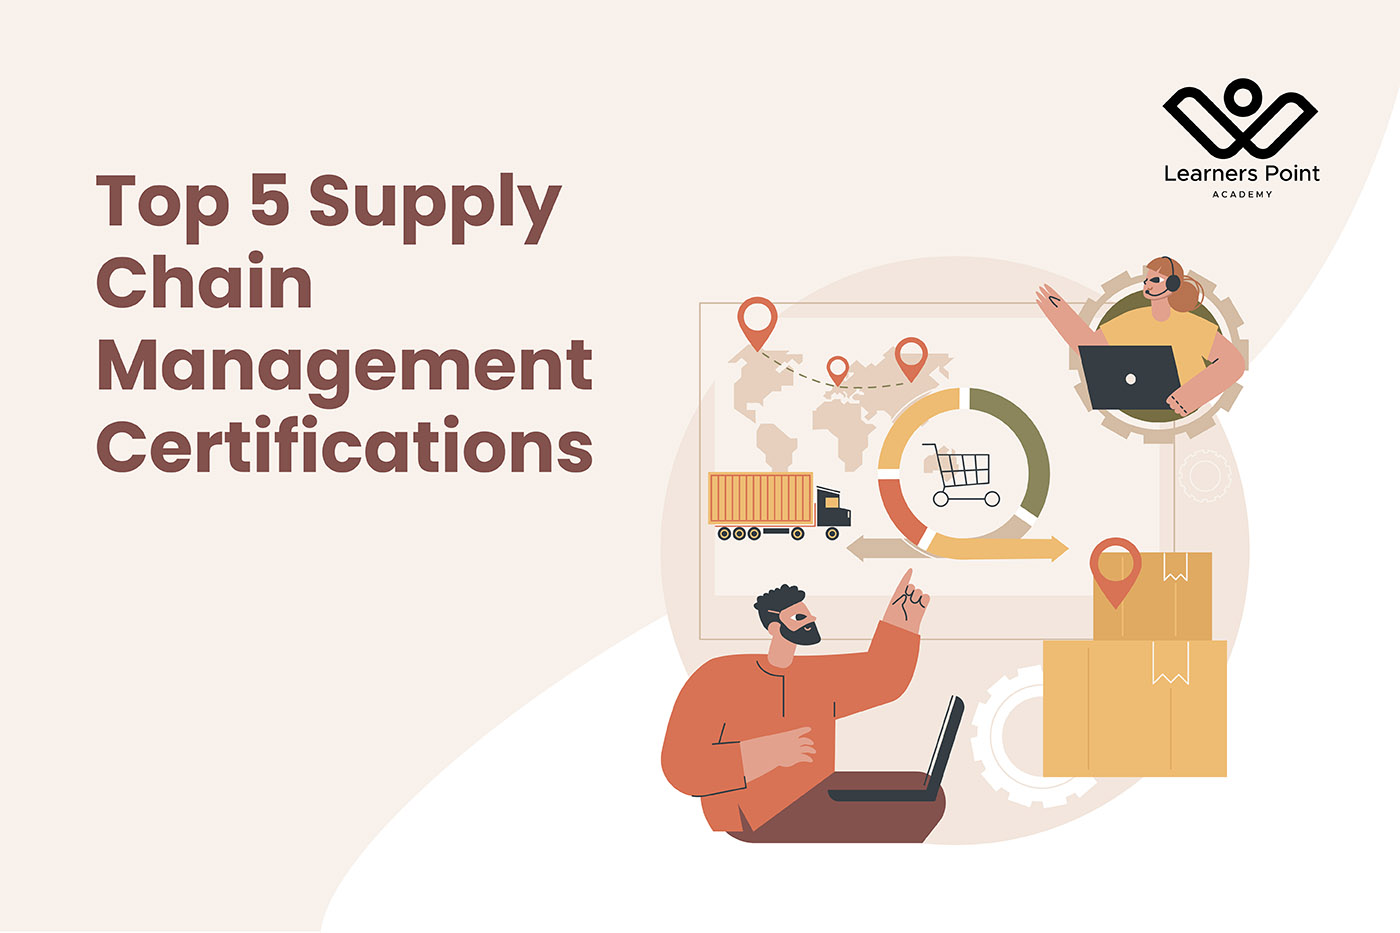 Top 5 Supply Chain Management Certifications